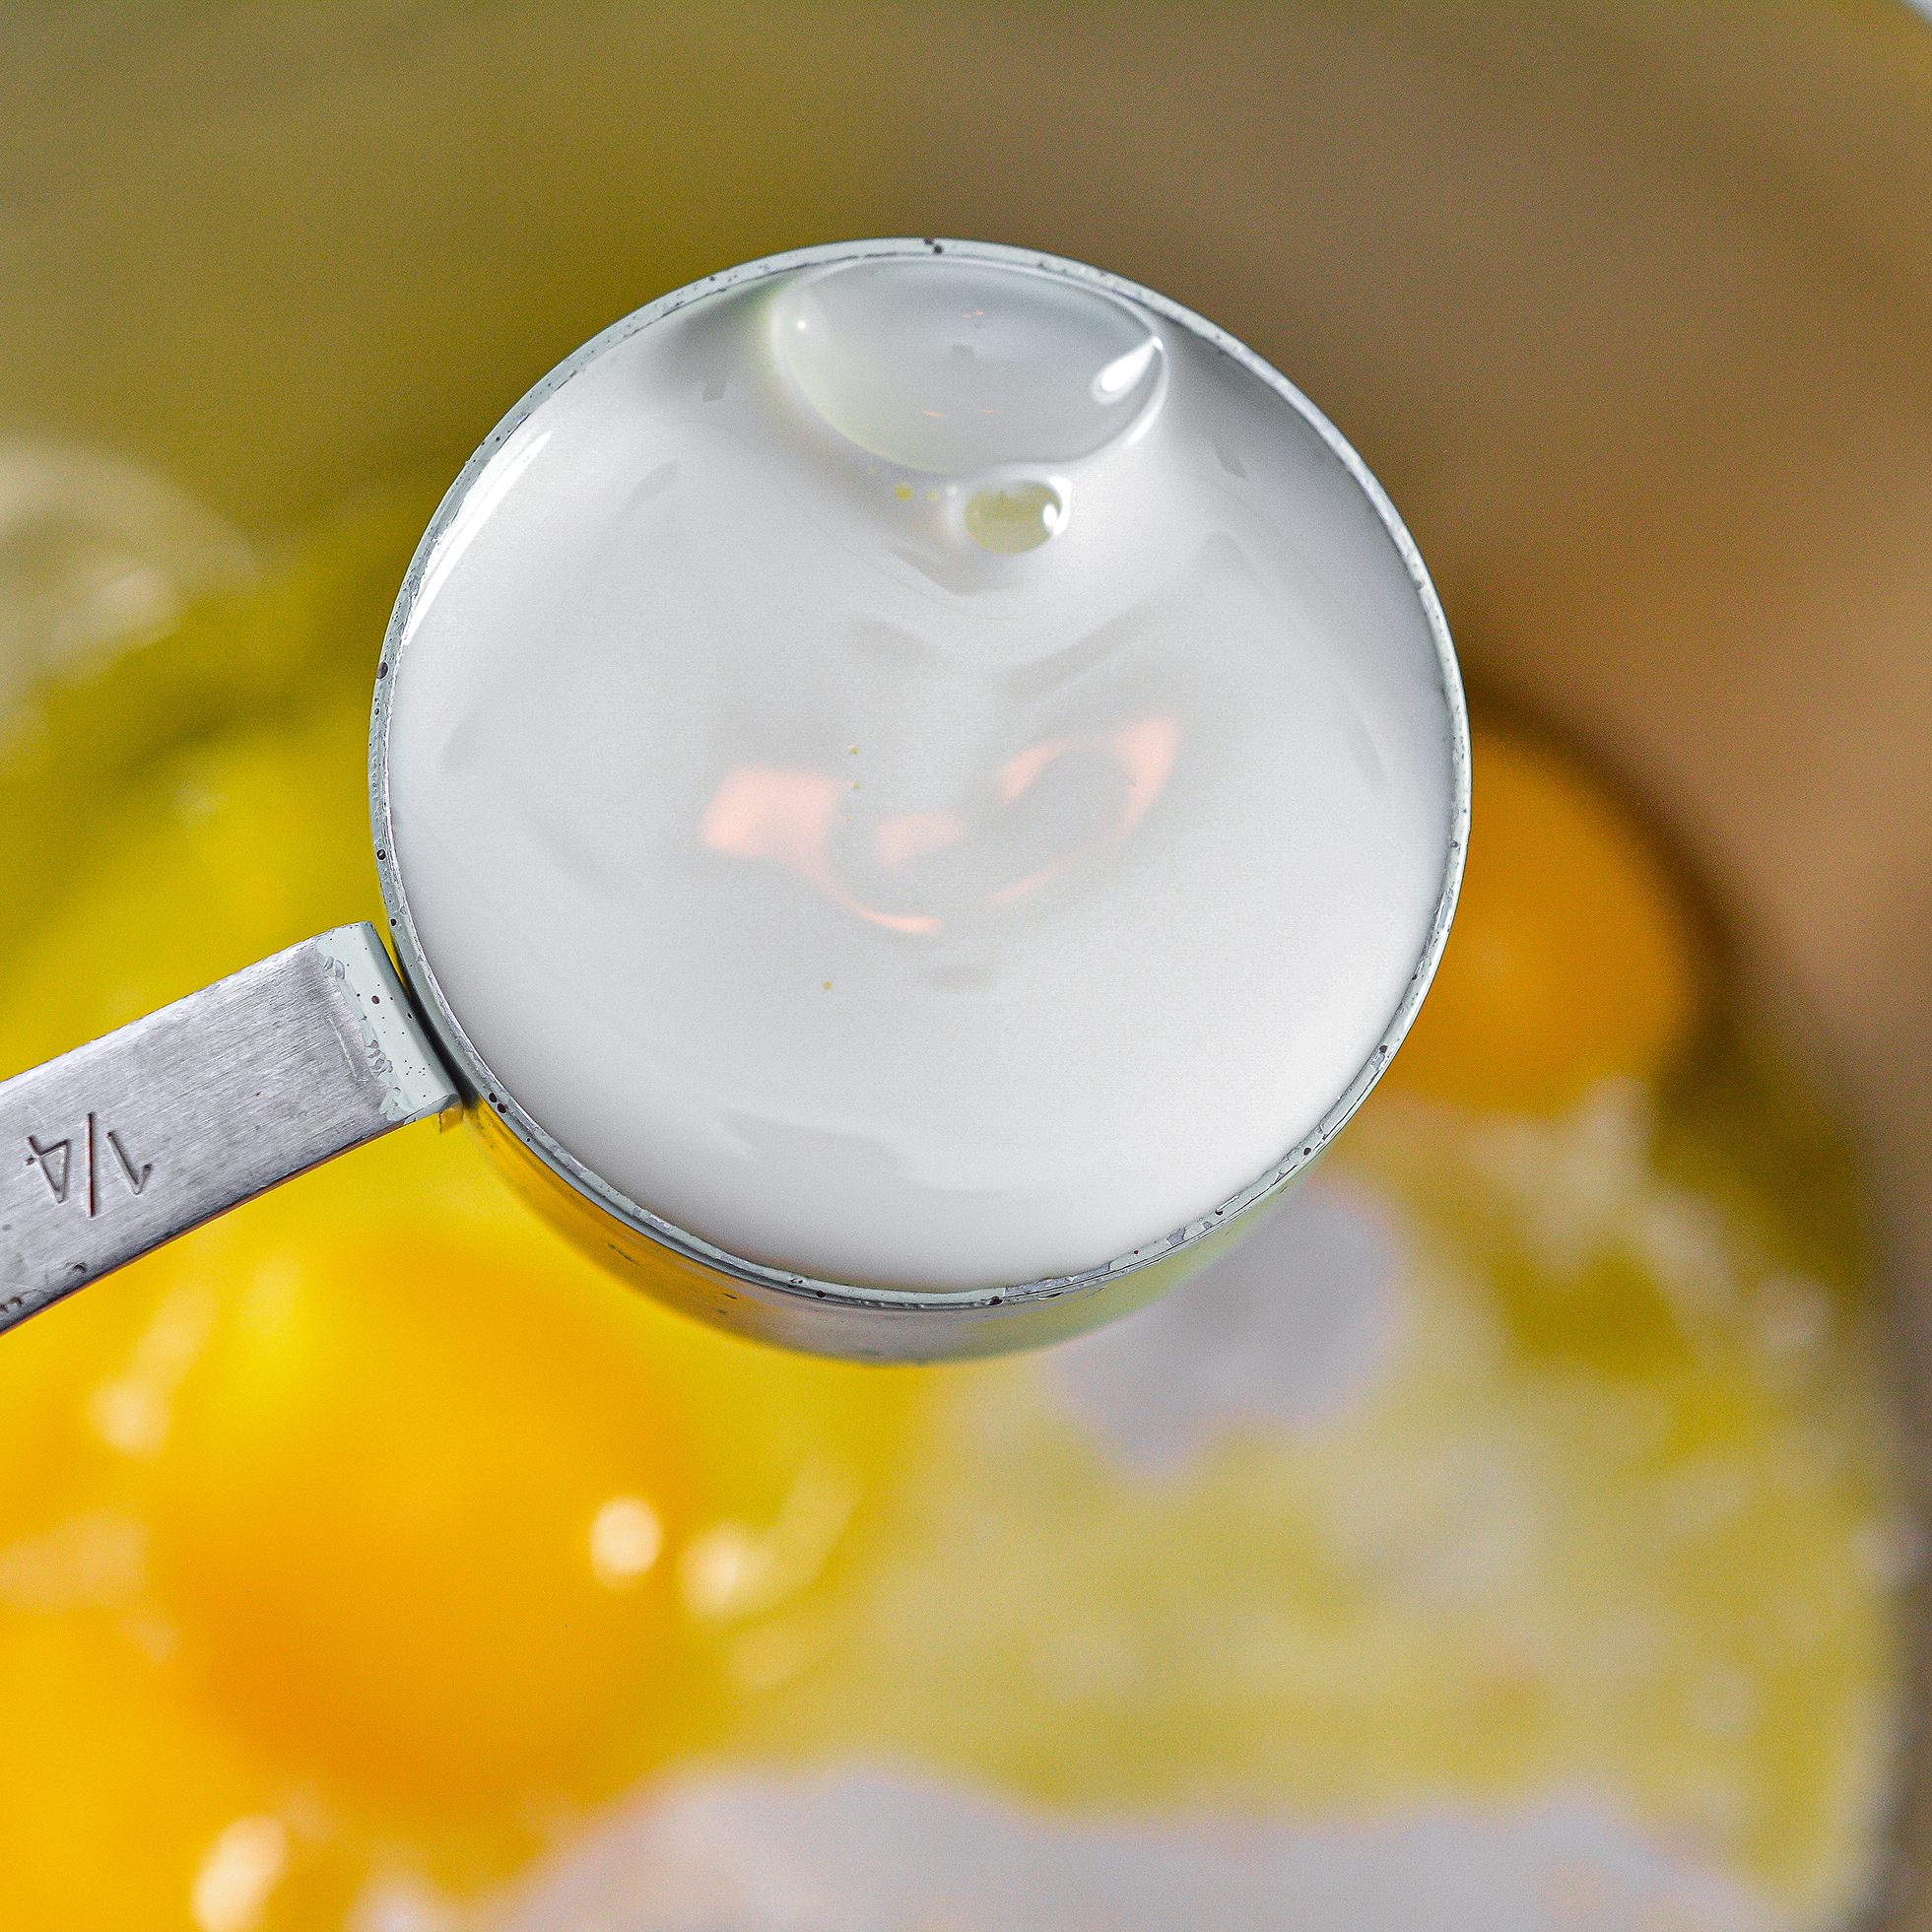 In a mixing bowl, beat together the cake mix, sour cream, oil, eggs, and ¼ cup of milk until smooth.